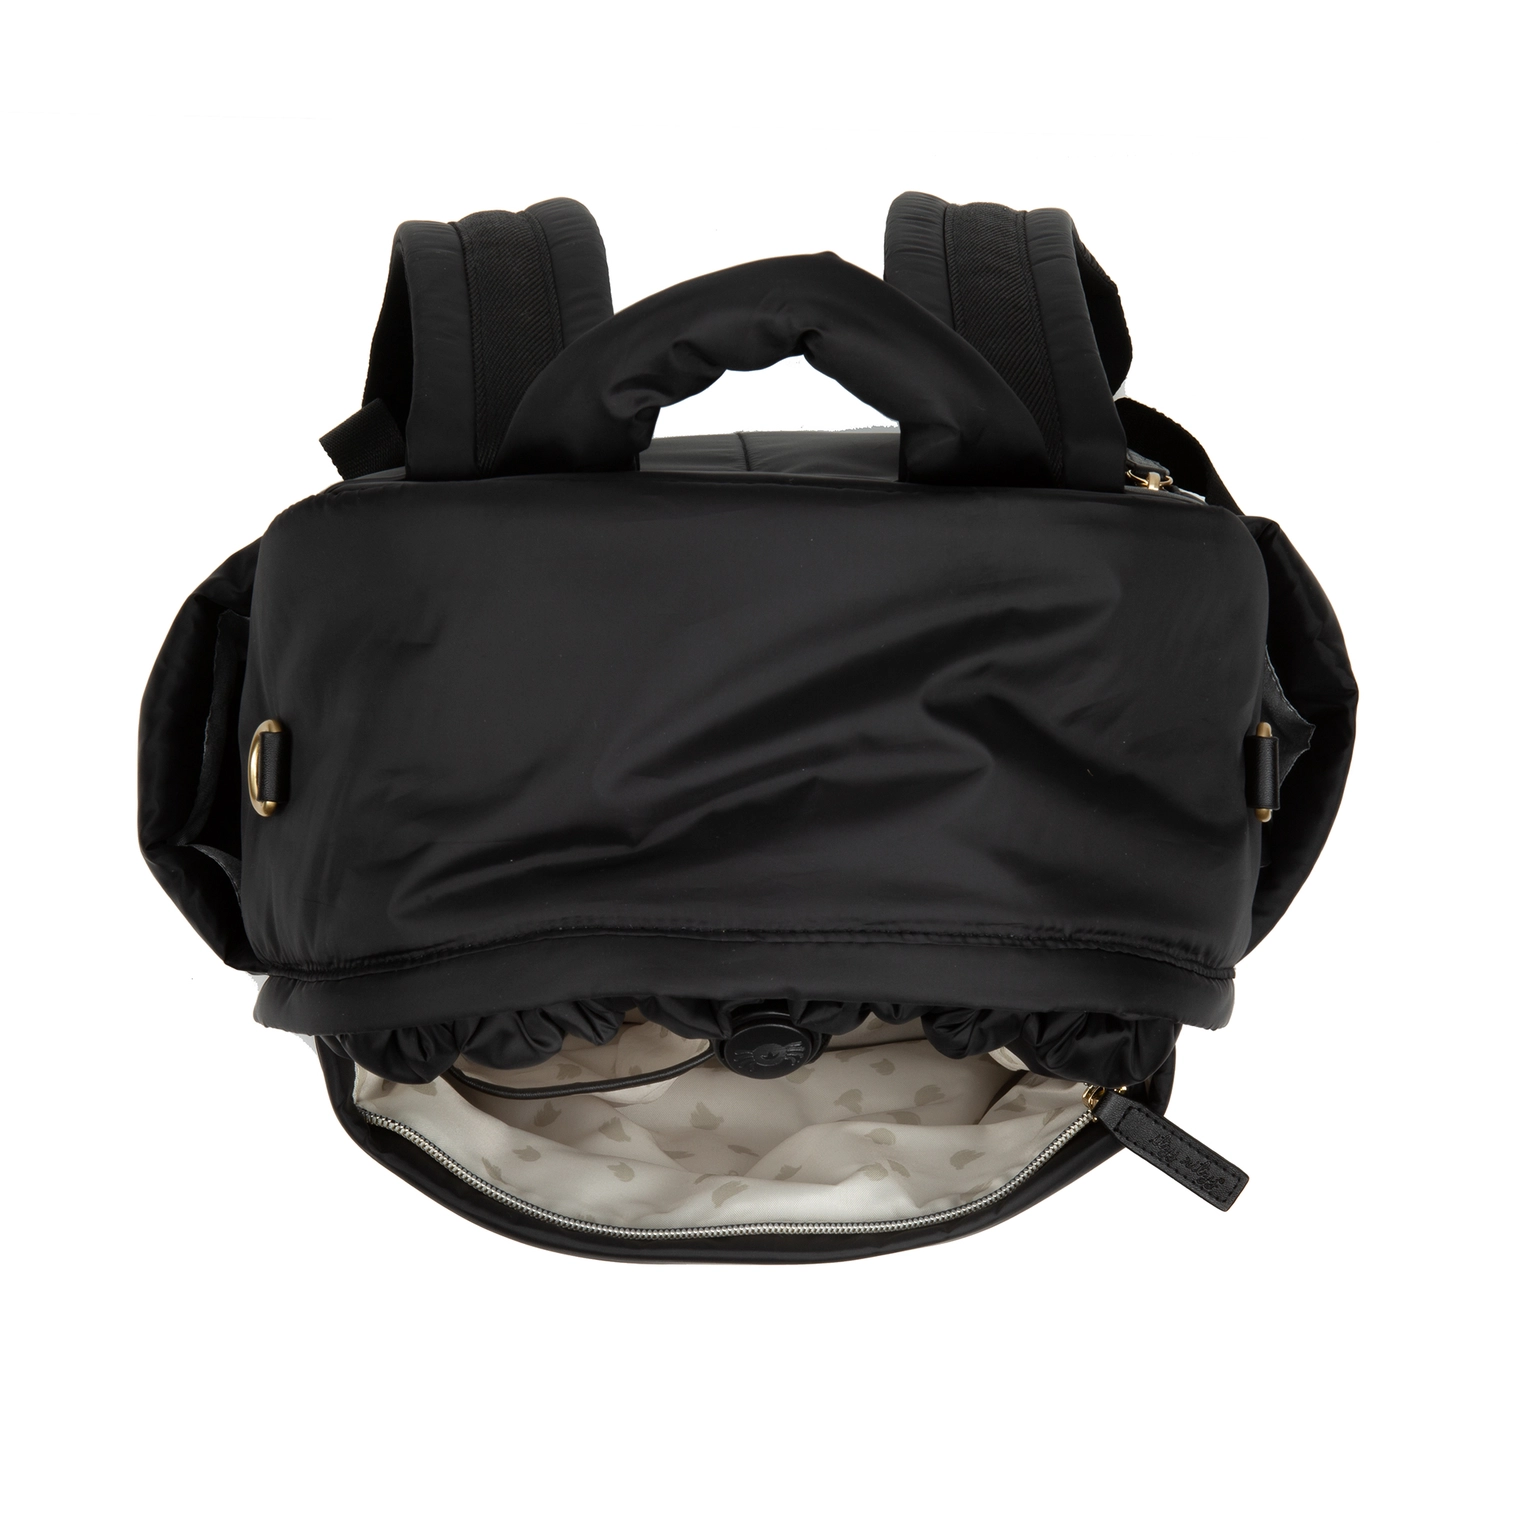 Midnight Like A Dream Backpack Diaper Bag - Itzy Ritzy